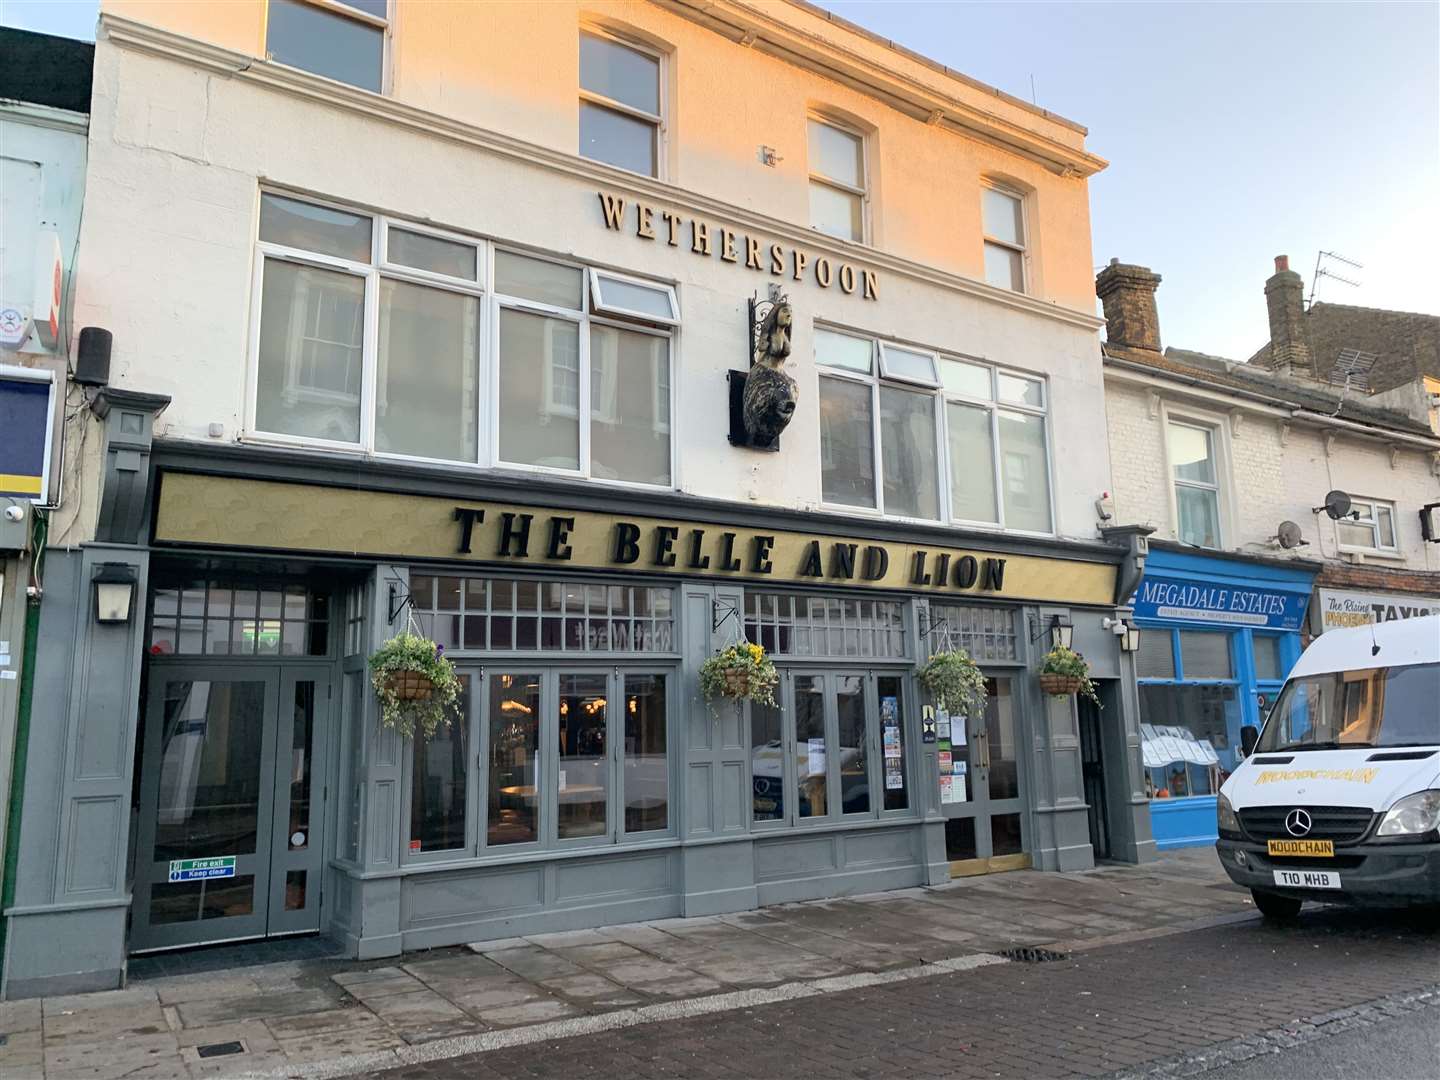 The Belle and Lion Wetherspoon pub in Sheerness High Street opened in 2014